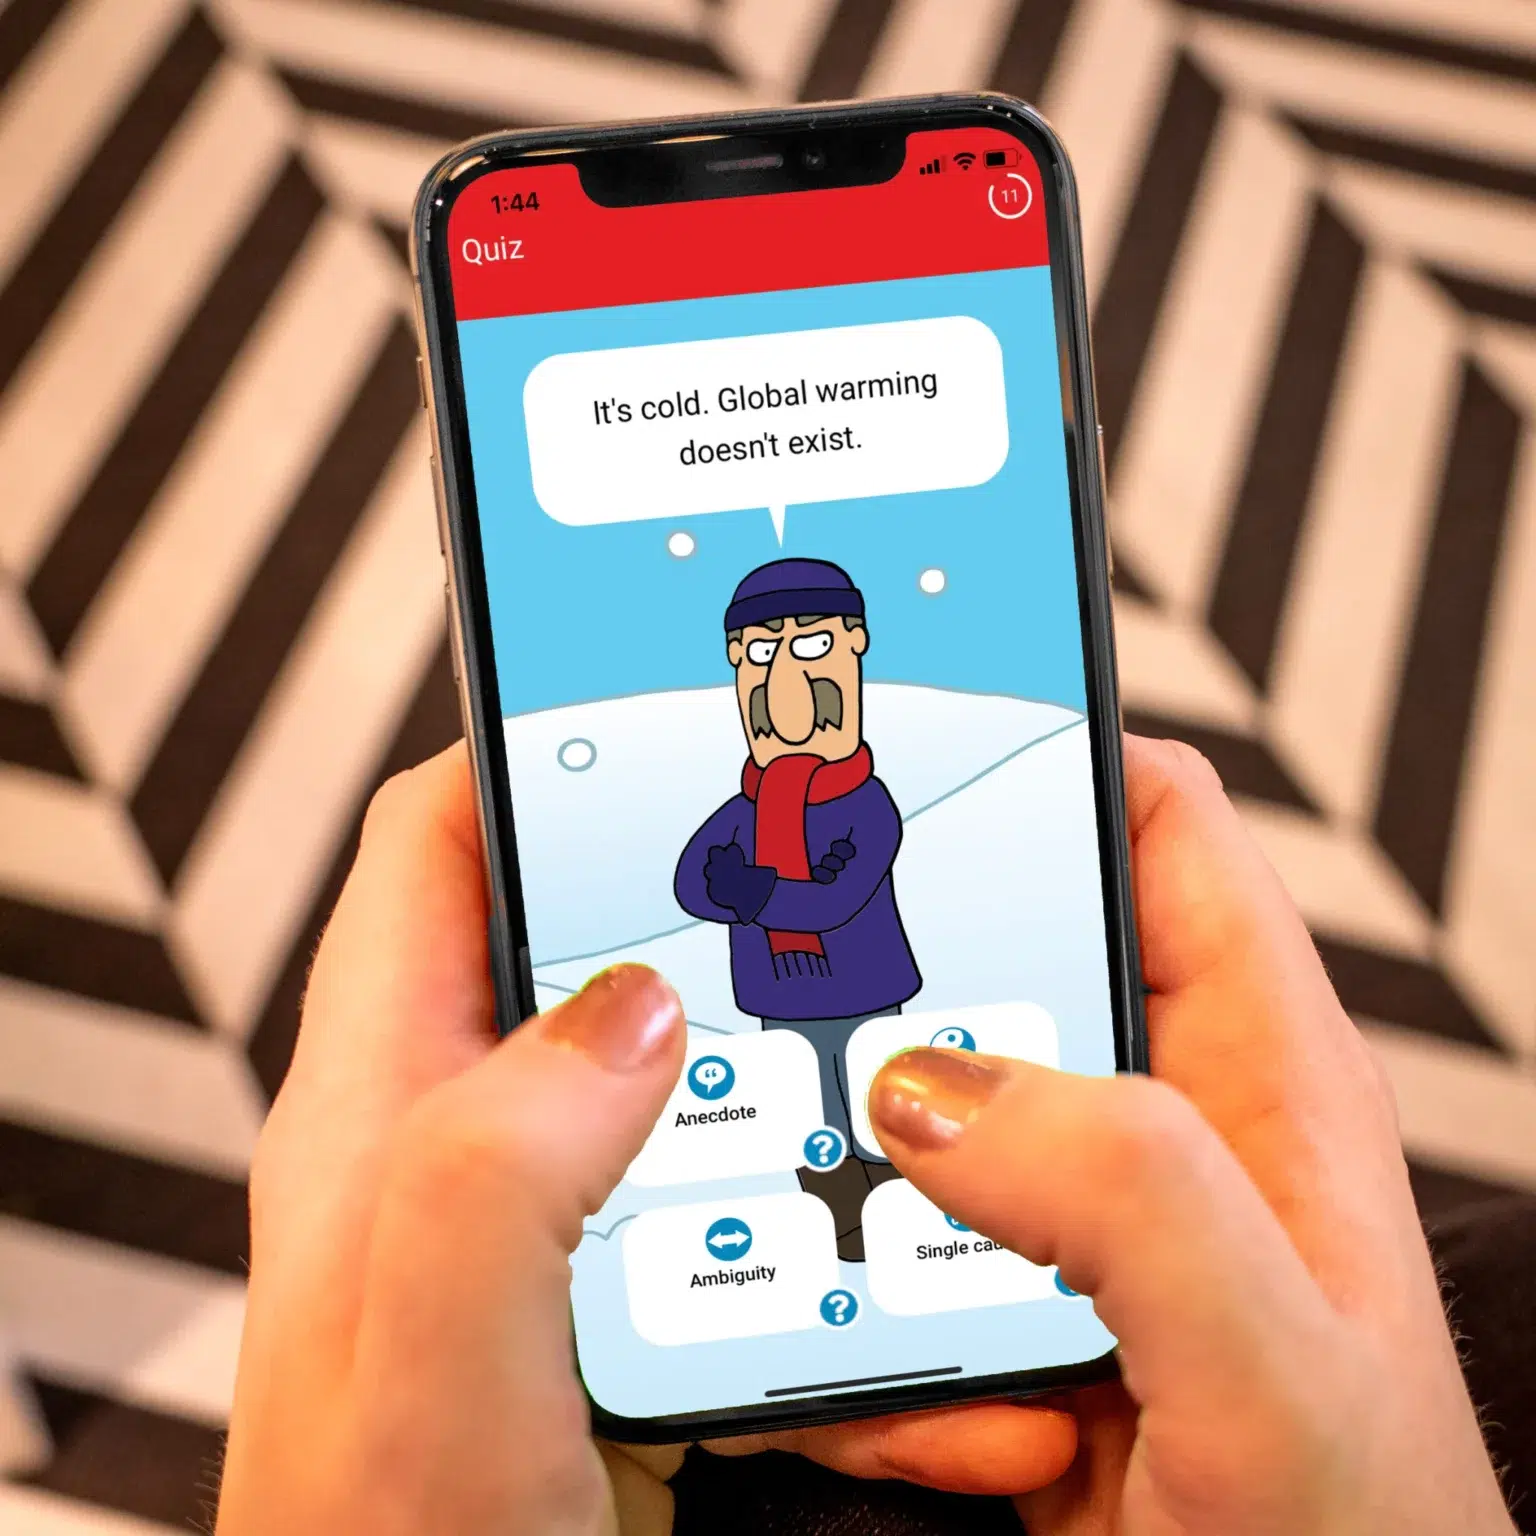 A person is holding a cell phone showing an image from the Cranky Uncle game. The cranky uncle is standing outside in the snow and saying, "It's cold. Global warming doesn't exist." Buttons underneath give the user options to identify the type of misinformation.